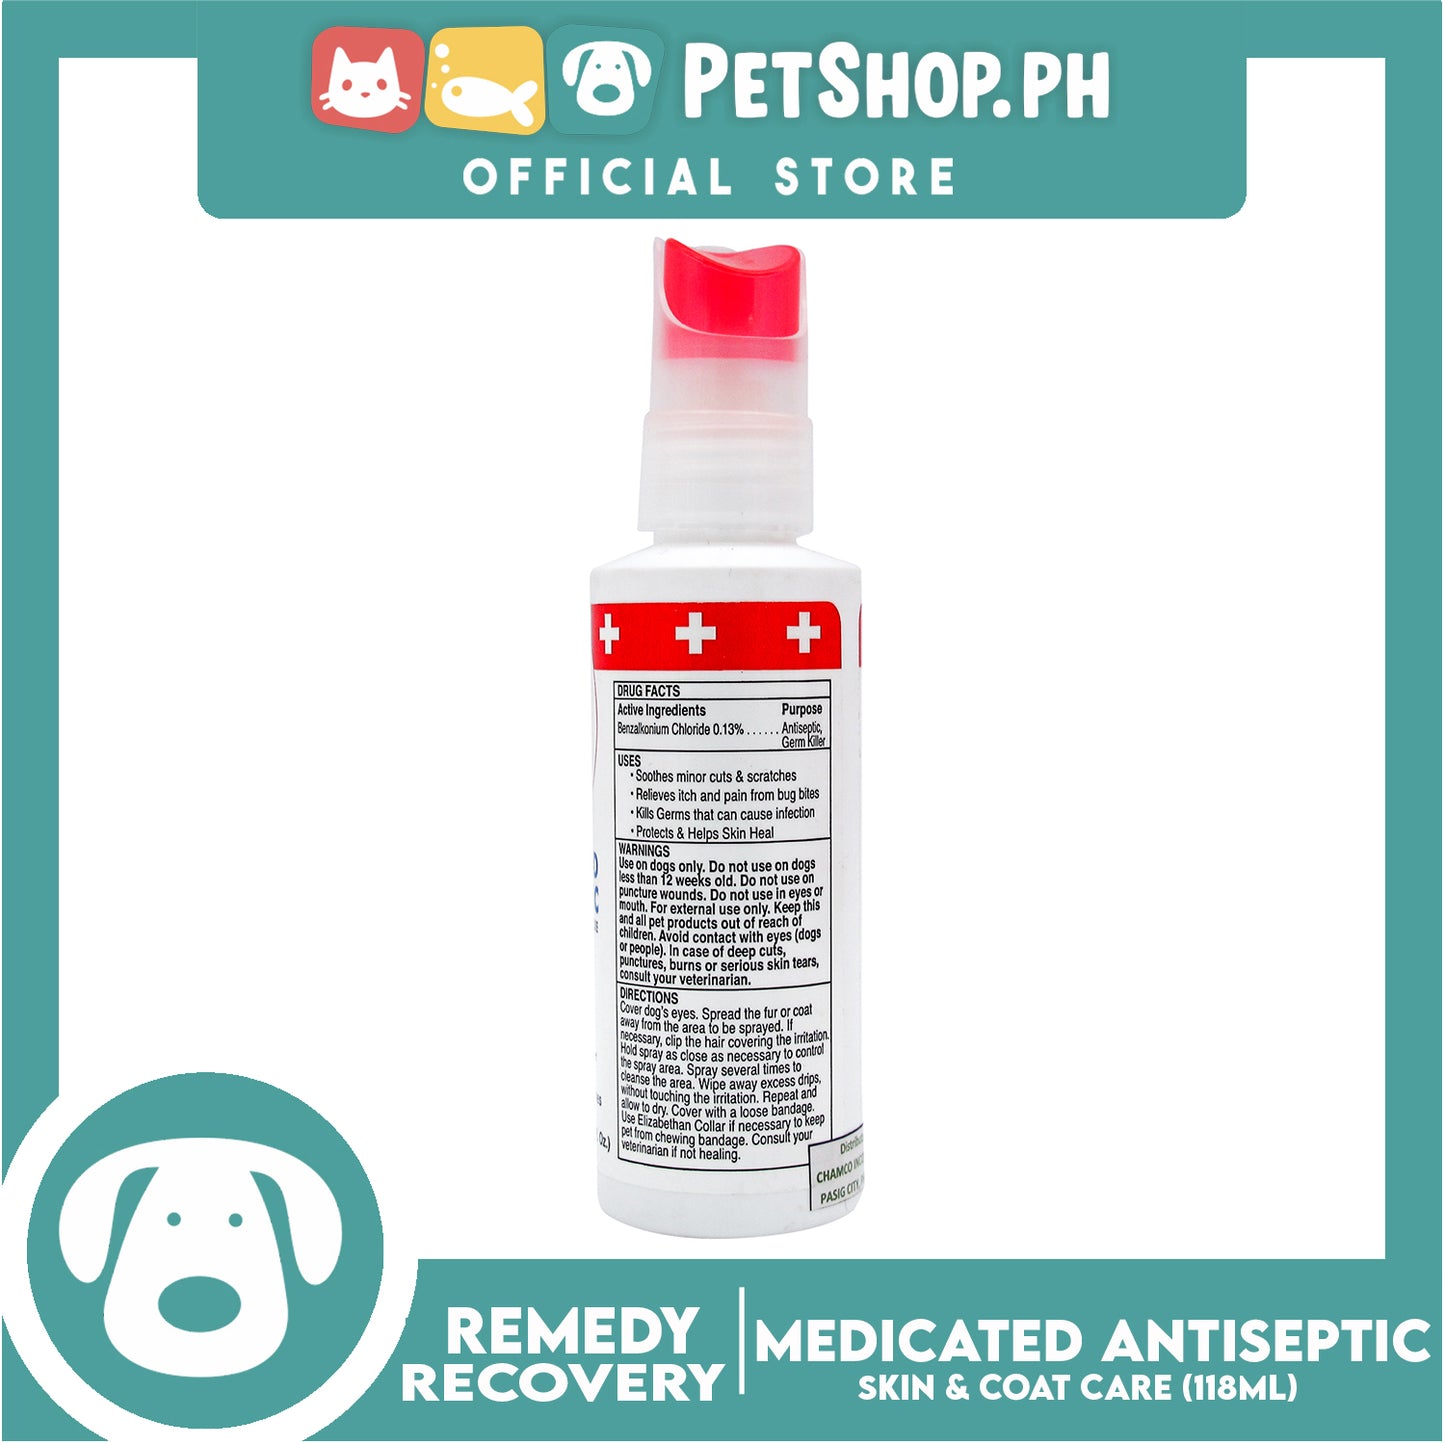 Remedy + Recovery Medicated Antiseptic118mL